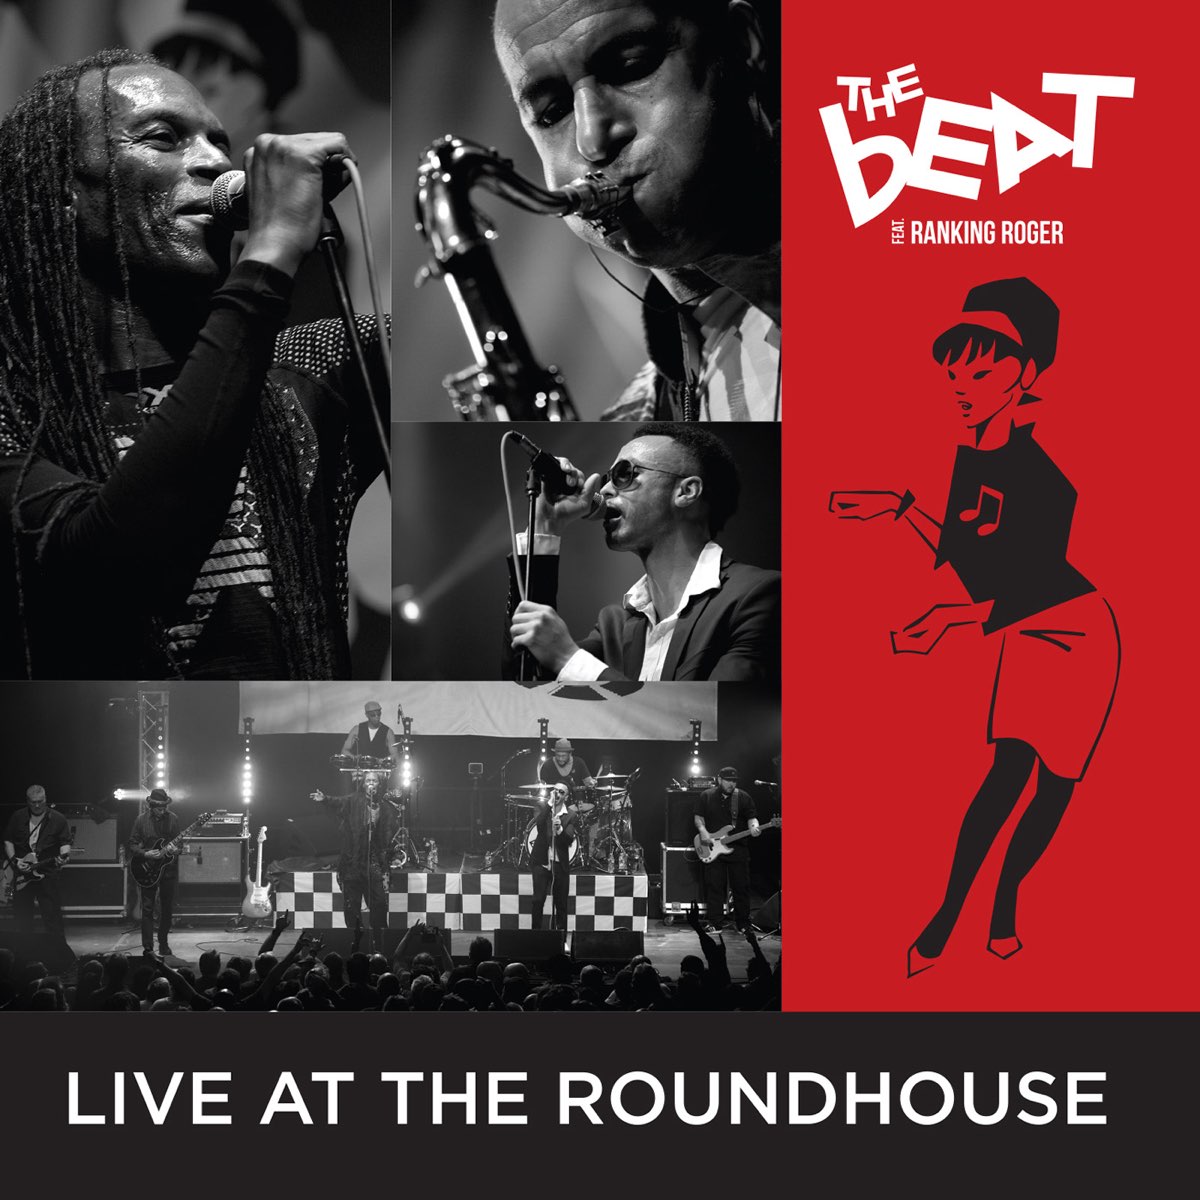 Live at the Roundhouse - Album by The Beat feat. Ranking Roger - Apple Music